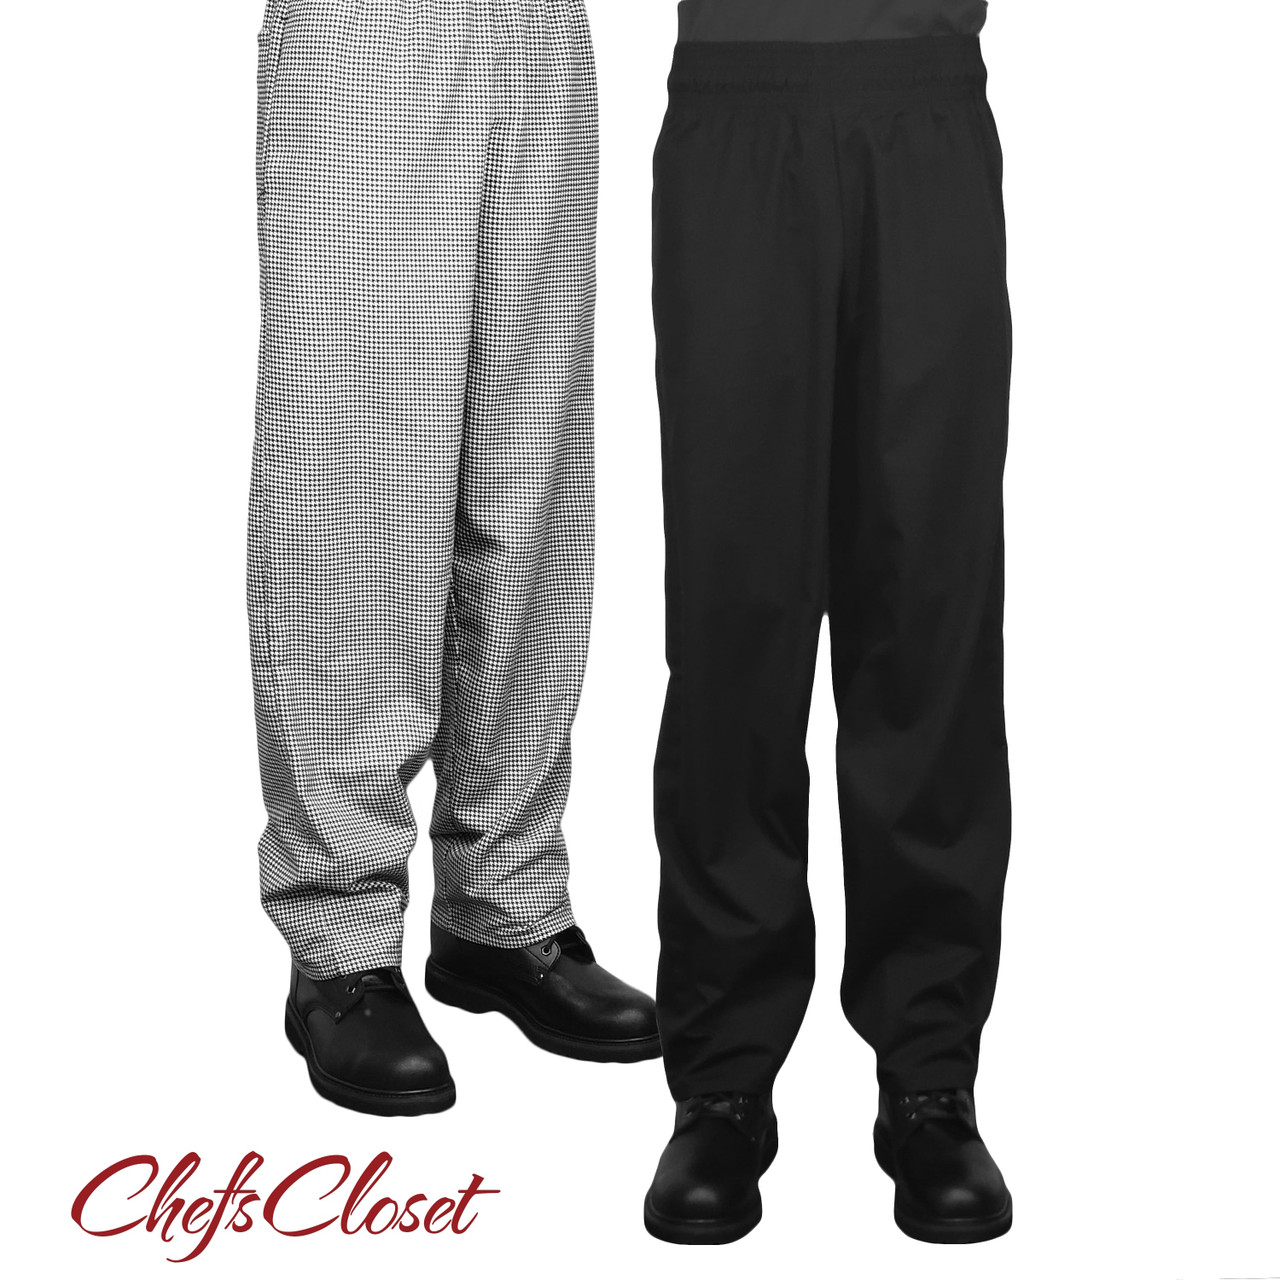 Clearance Deal on Chef Pants - ChefsCloset